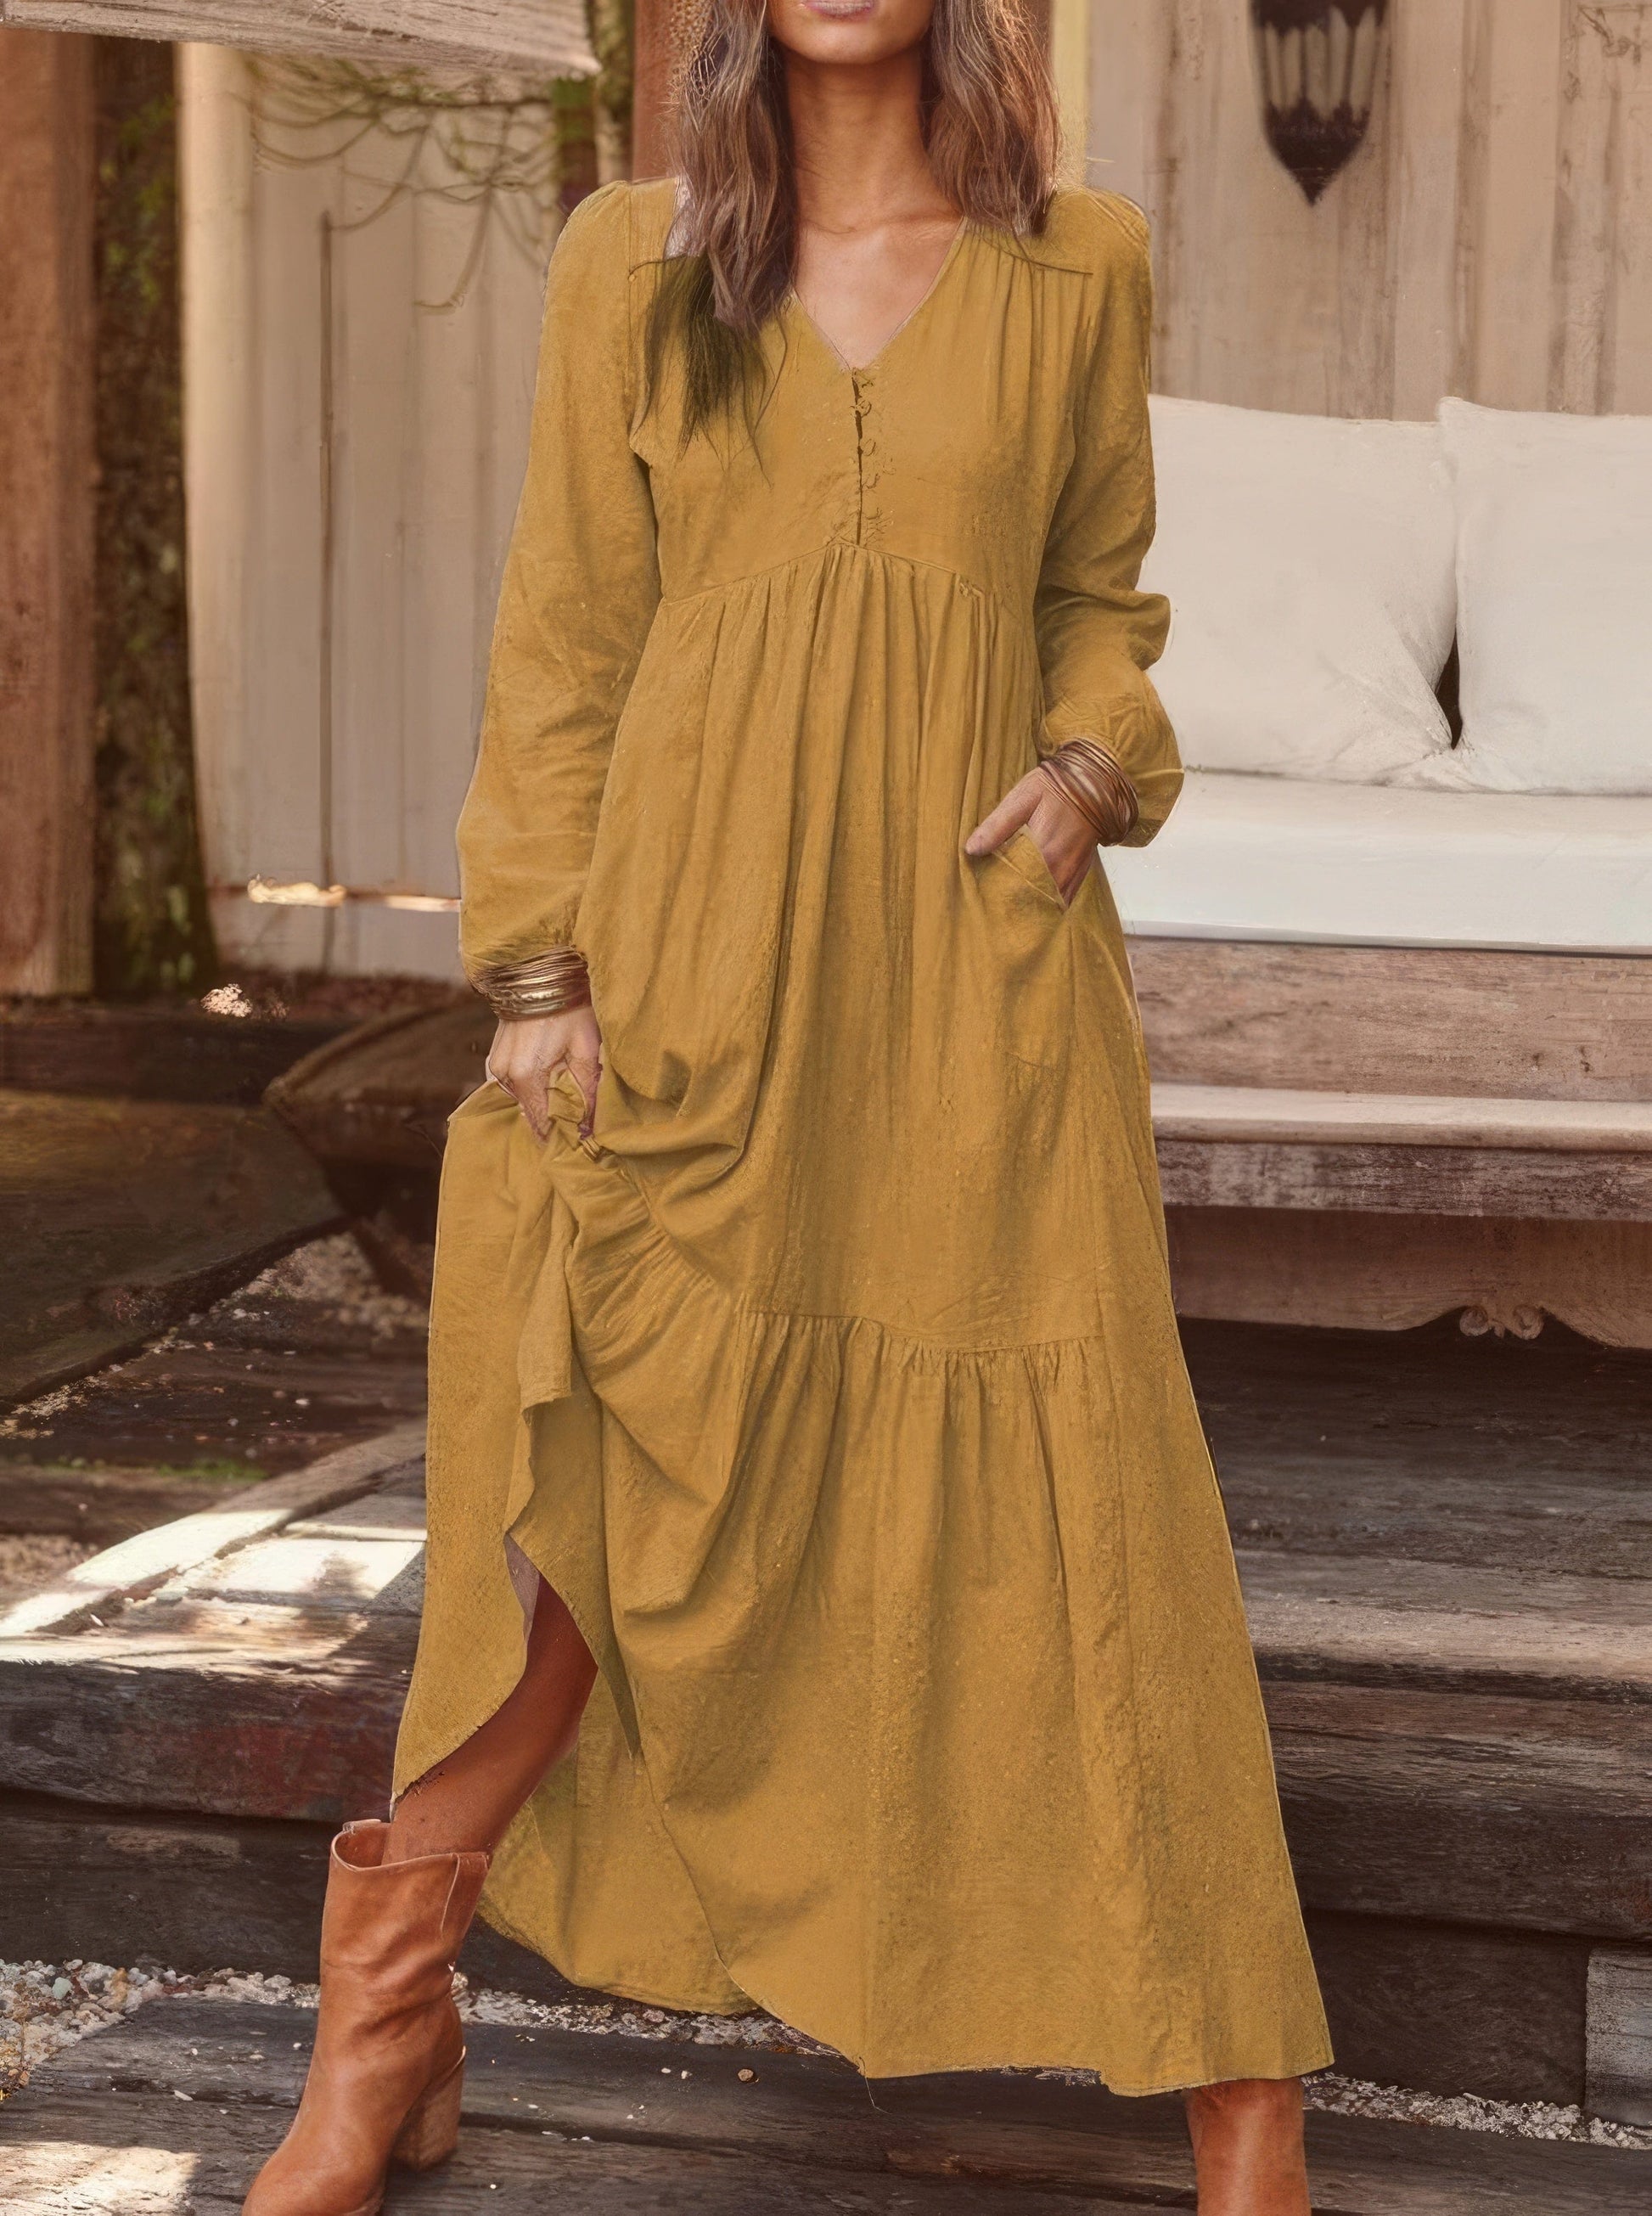 Casual Long-sleeved Dress With Big Swing